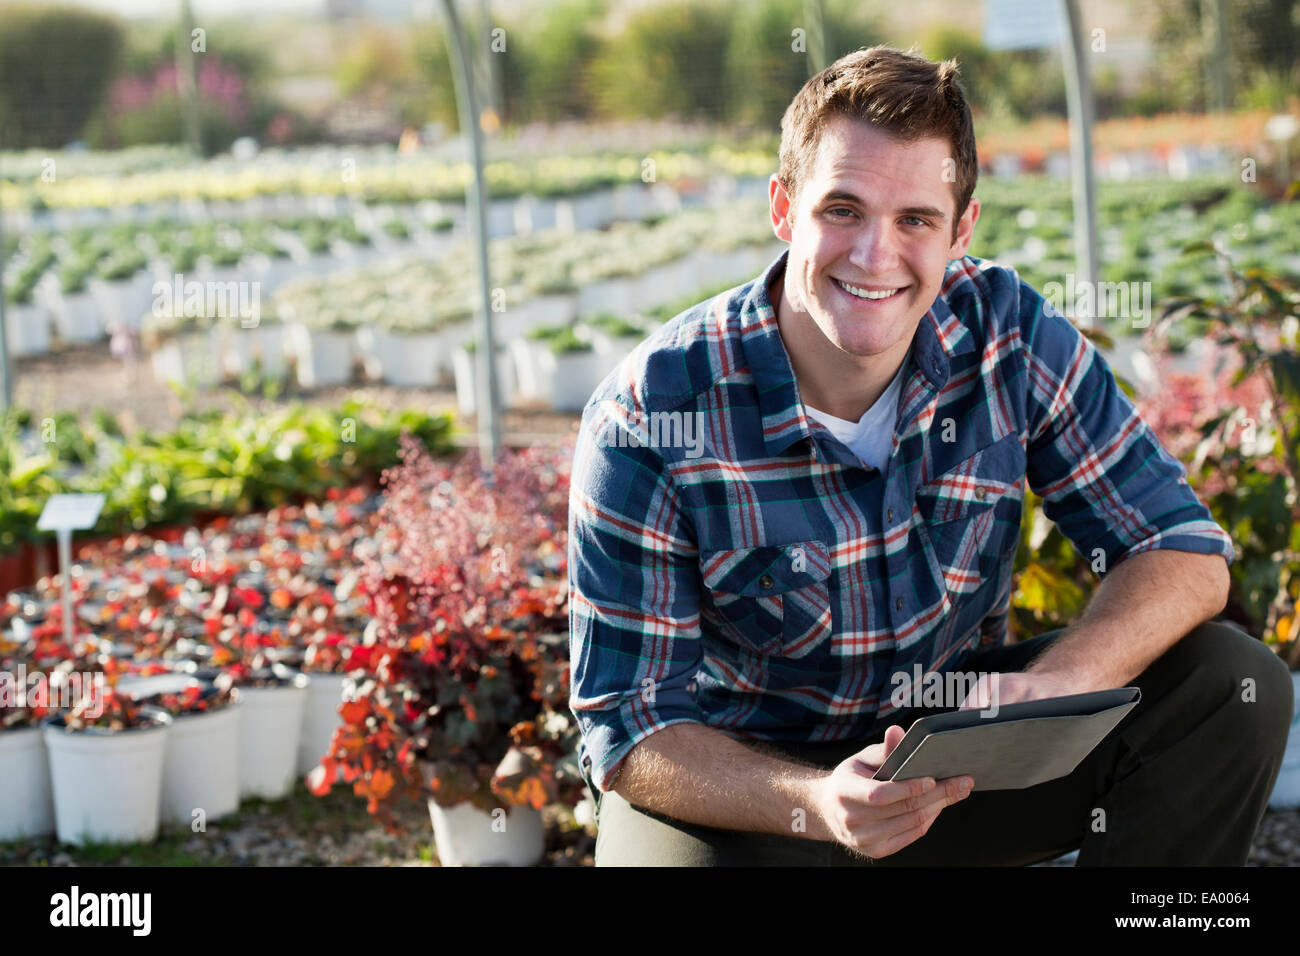 Portrait of young male worker using digital tablet in plant nursery polytunnel Banque D'Images